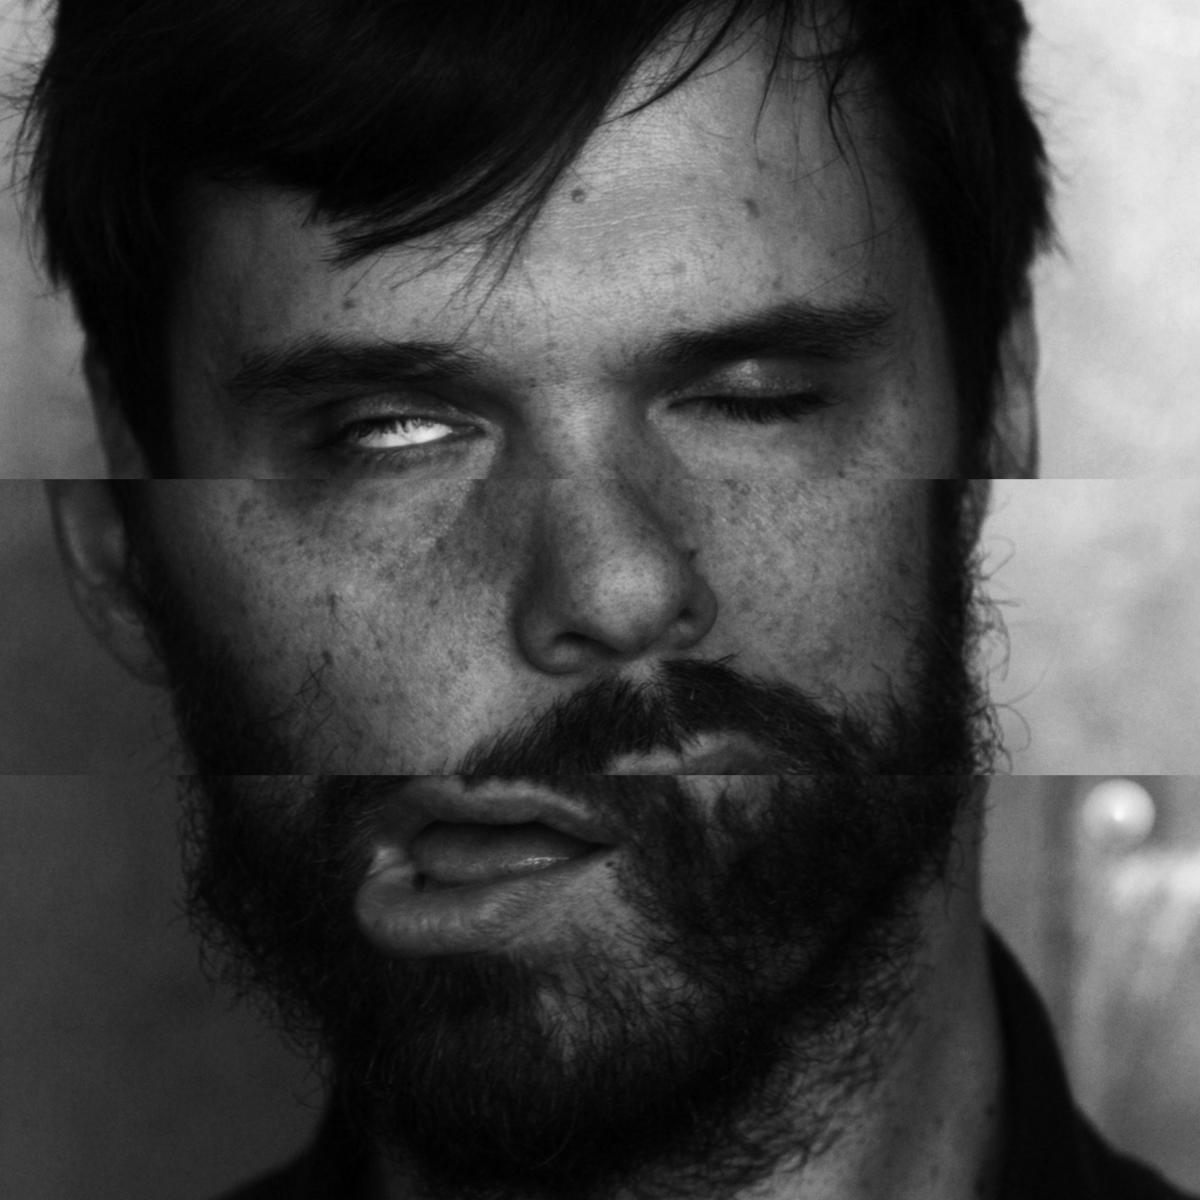 NEWS: Dirty Projectors share new video for ‘Keep Your Name’